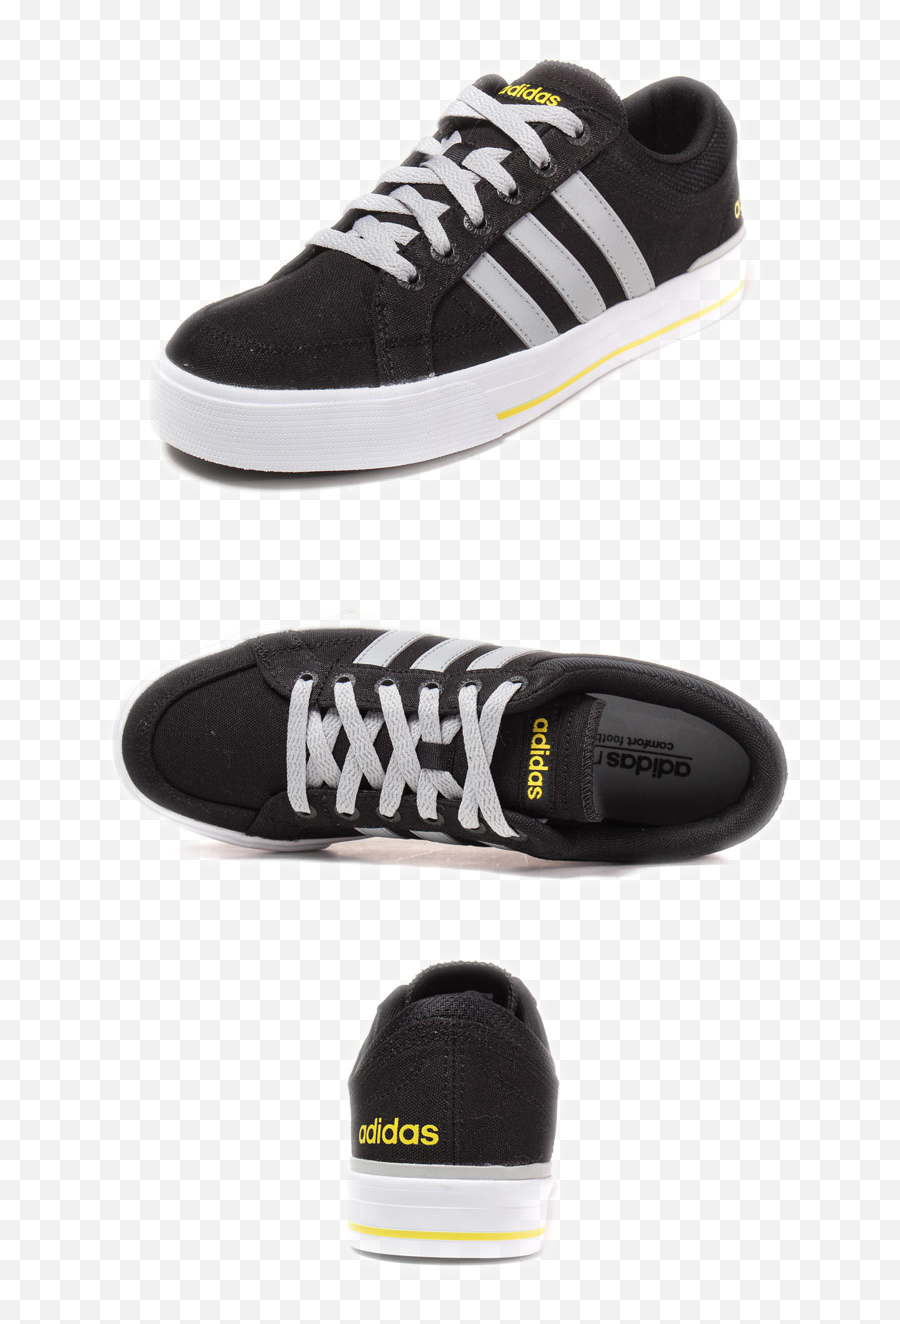 Download Free Superstar Shoes Adidas Sneakers Shoe Originals - Adidas Shoes Without Logo Png,Icon 9100